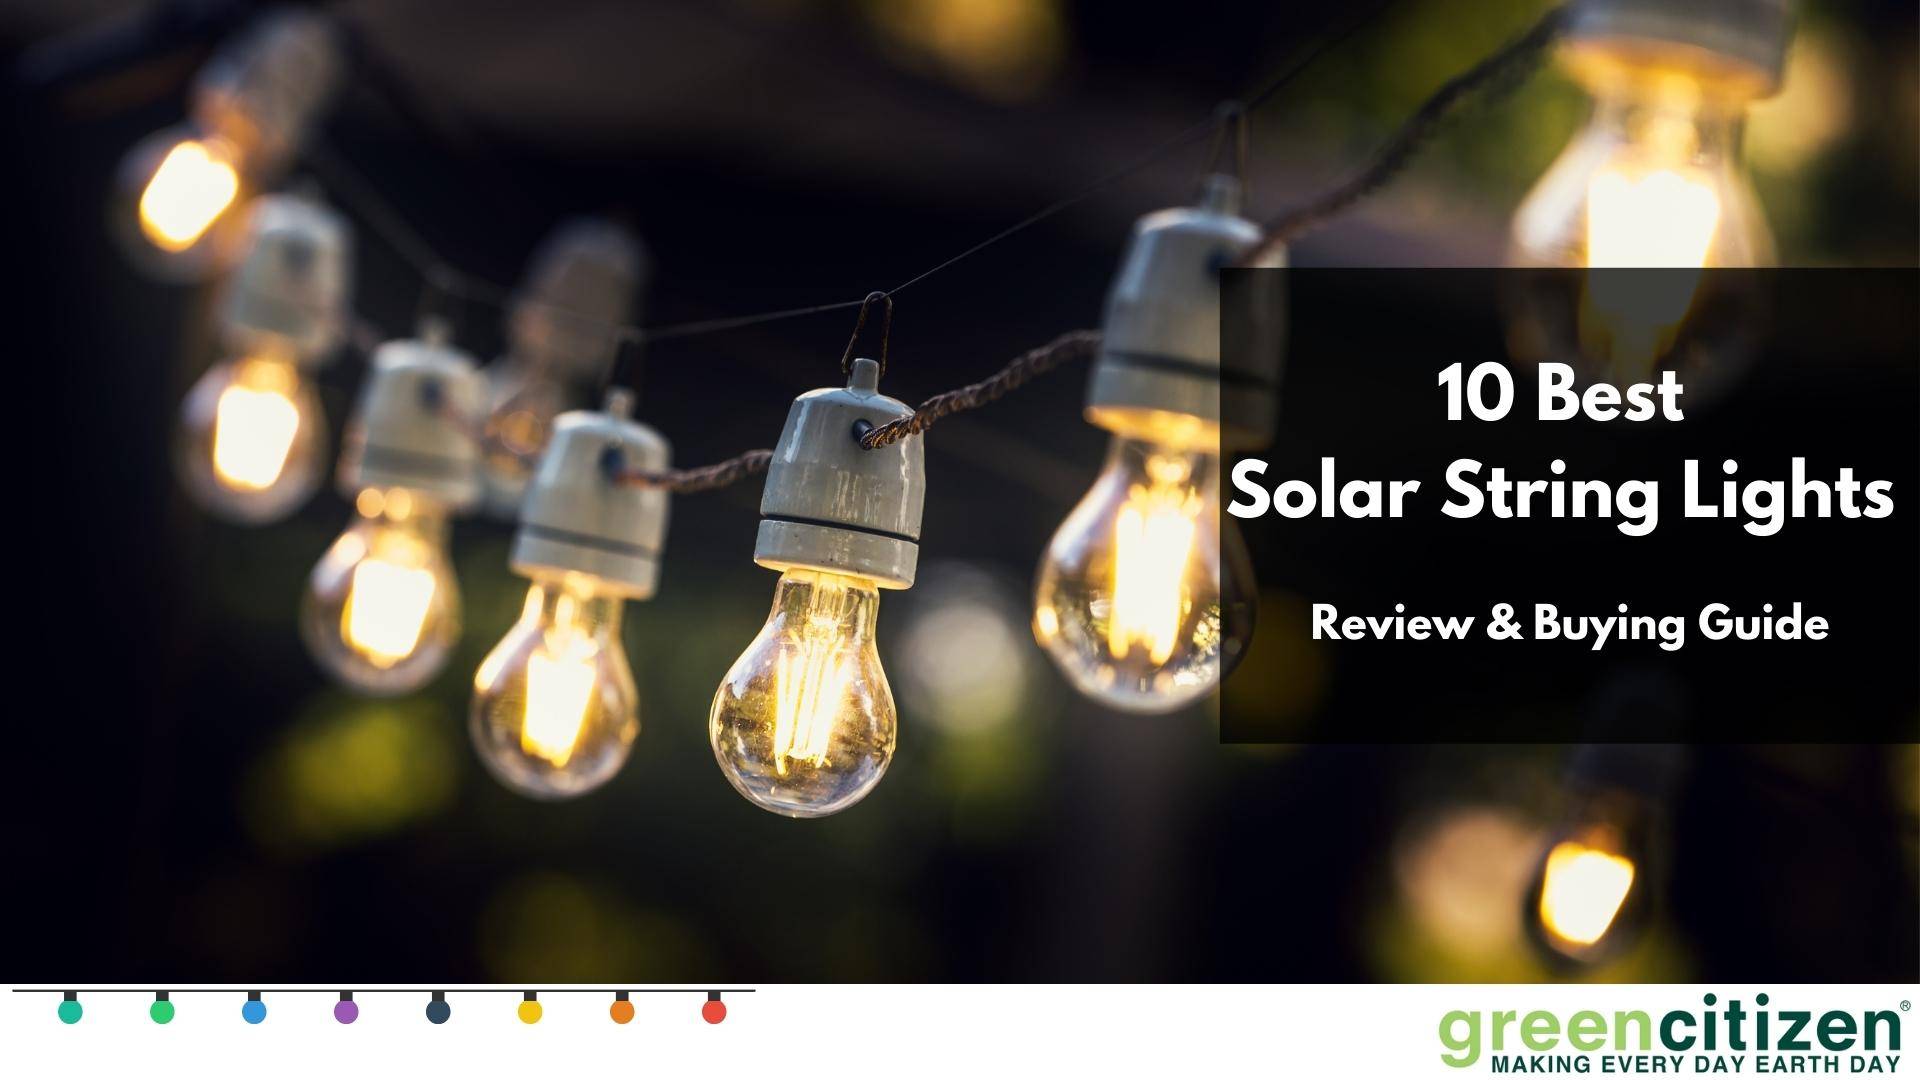 10 Best Solar String Lights: Review & Buying Guide